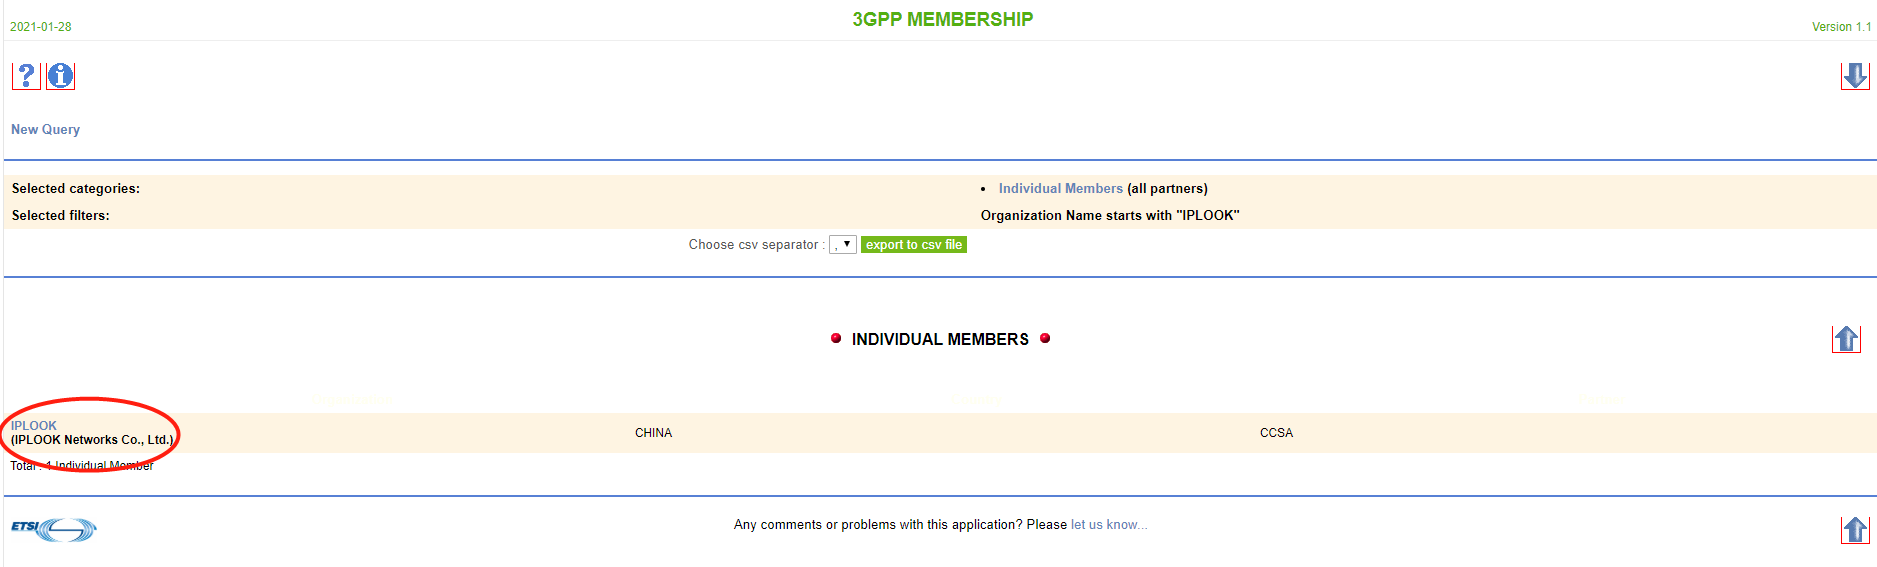 IPLOOK has officially become a member of 3GPP!